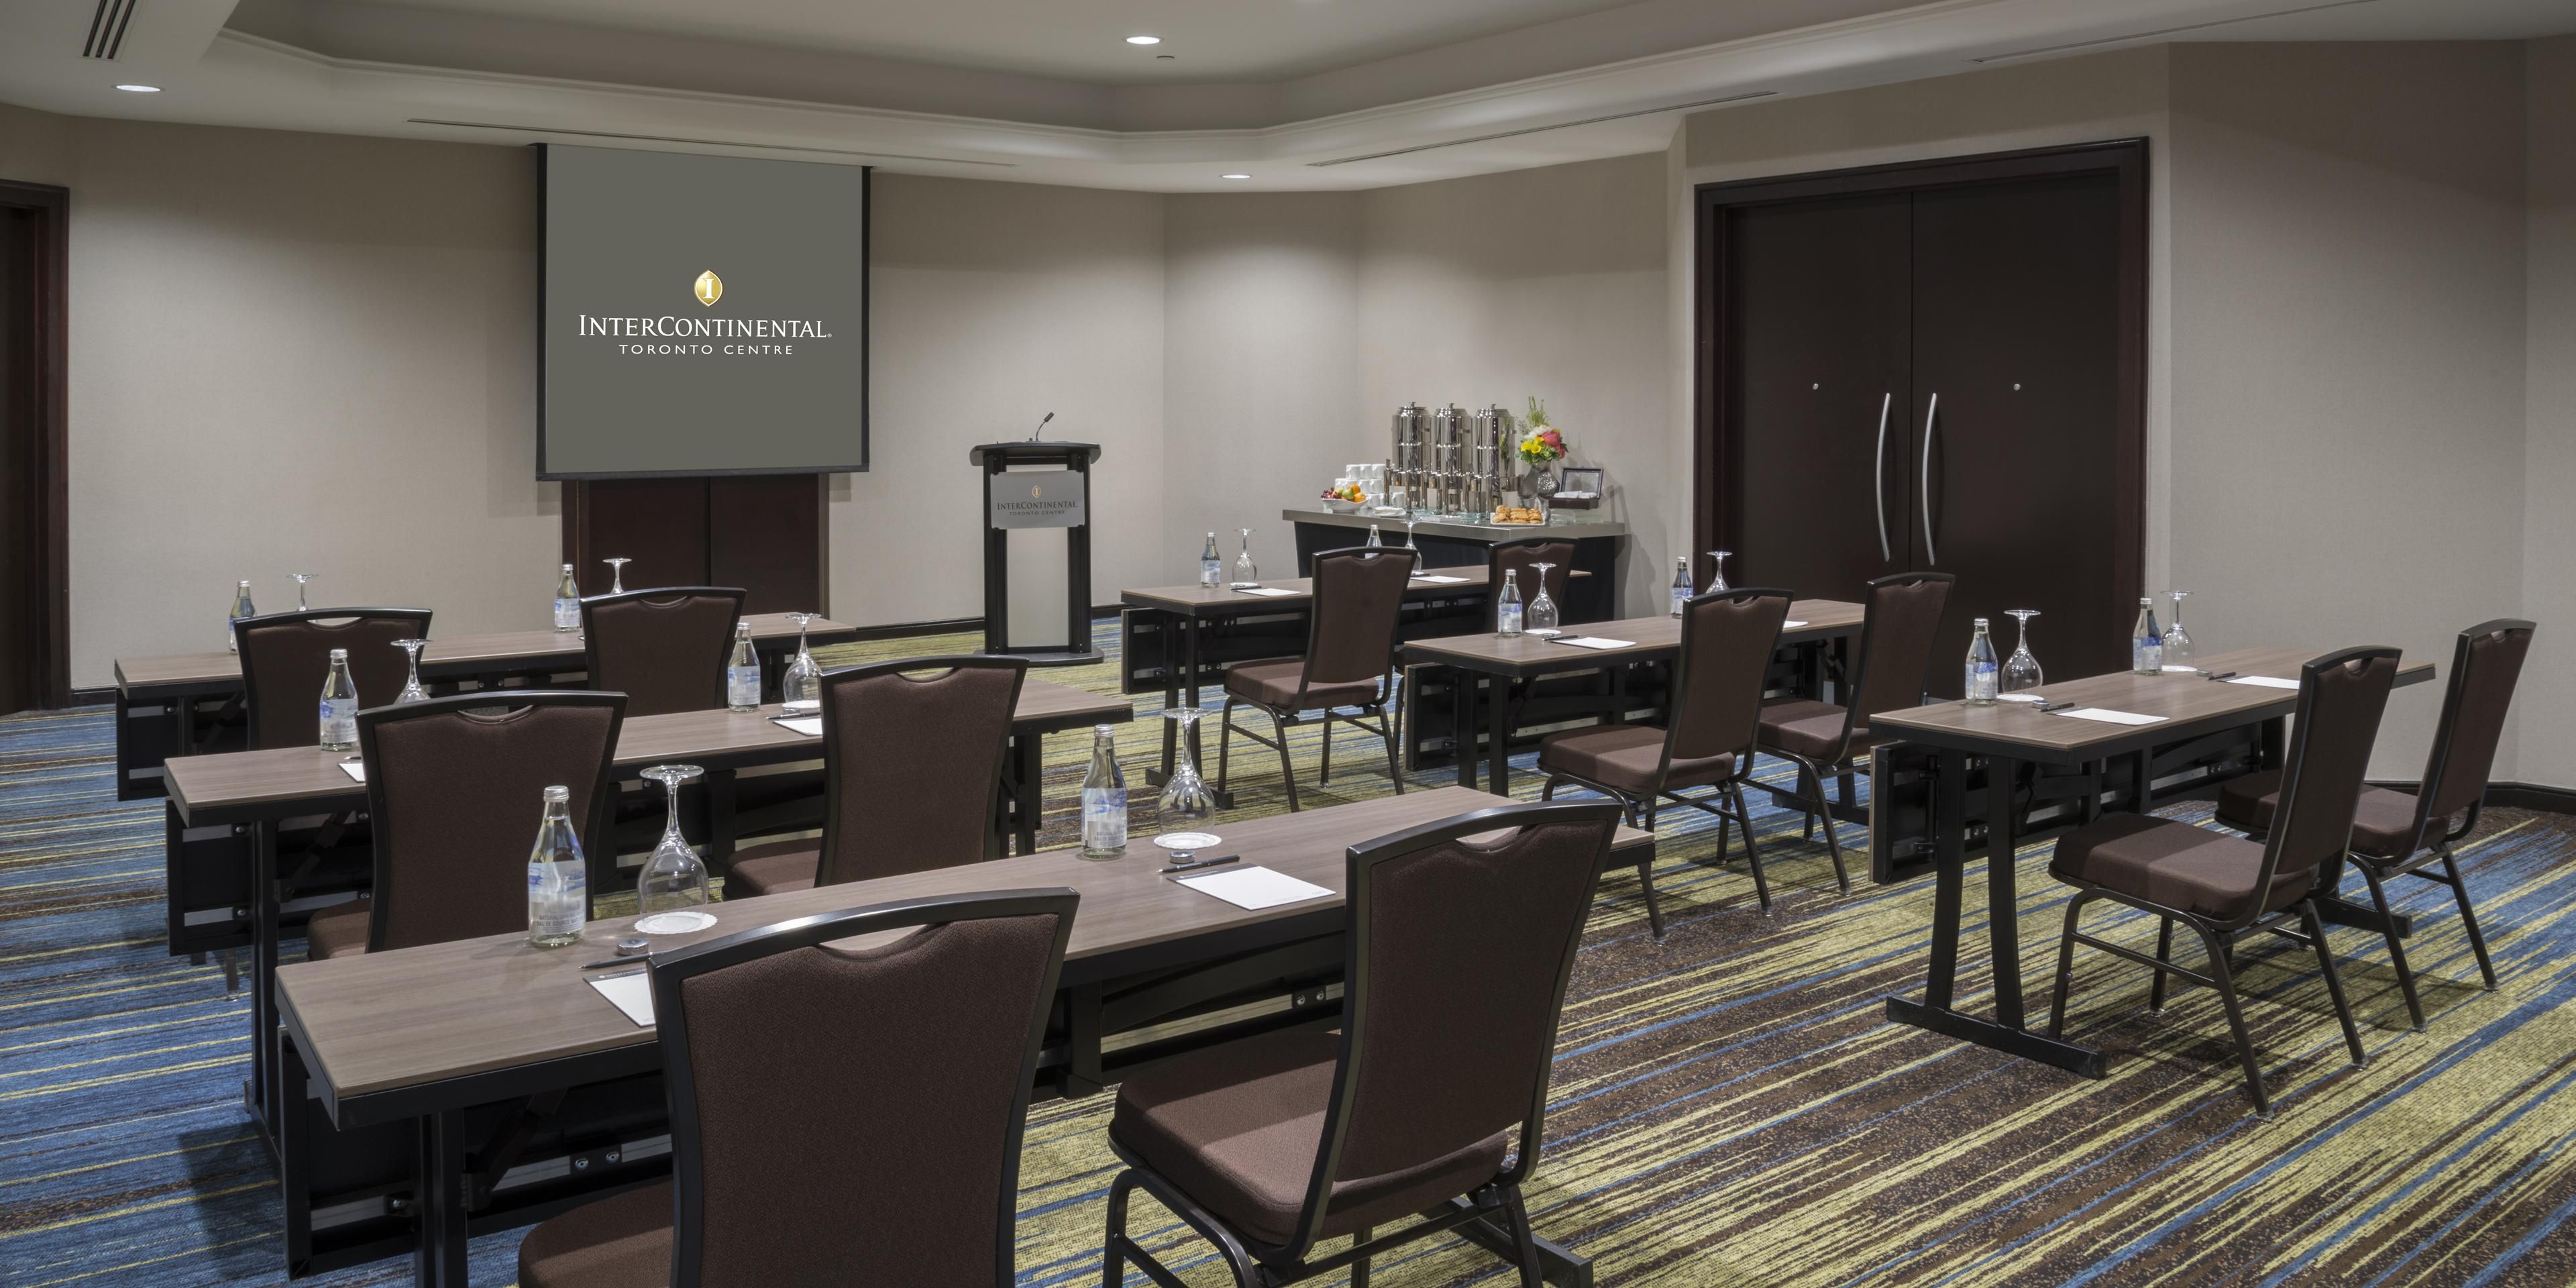 Planned by our dedicated teams with precise attention to detail, your event — whether personal or business — will exceed your expectations. With an unrivalled location in downtown Toronto, our 18,000 square feet of versatile and luxurious space can accommodate gatherings from small meetings to conferences.